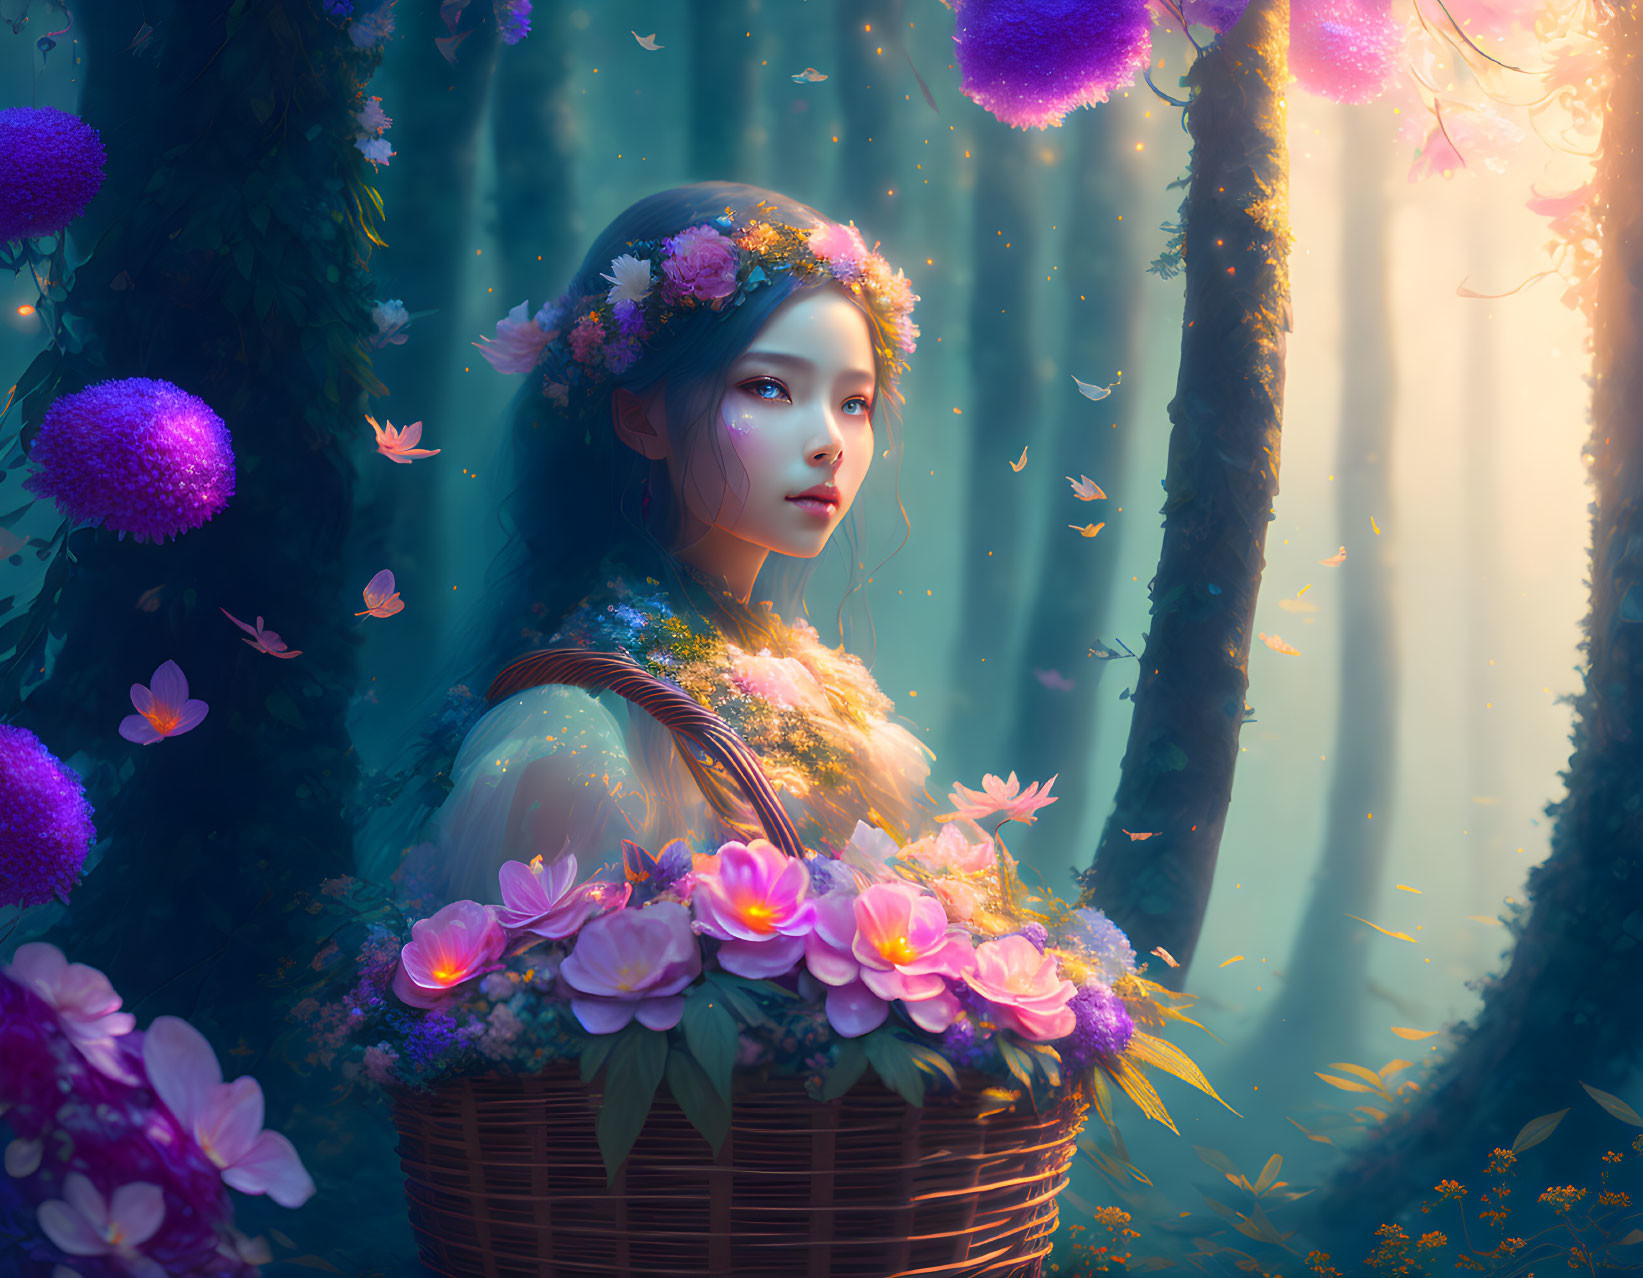 Mystical portrait of woman with floral wreath in enchanted forest